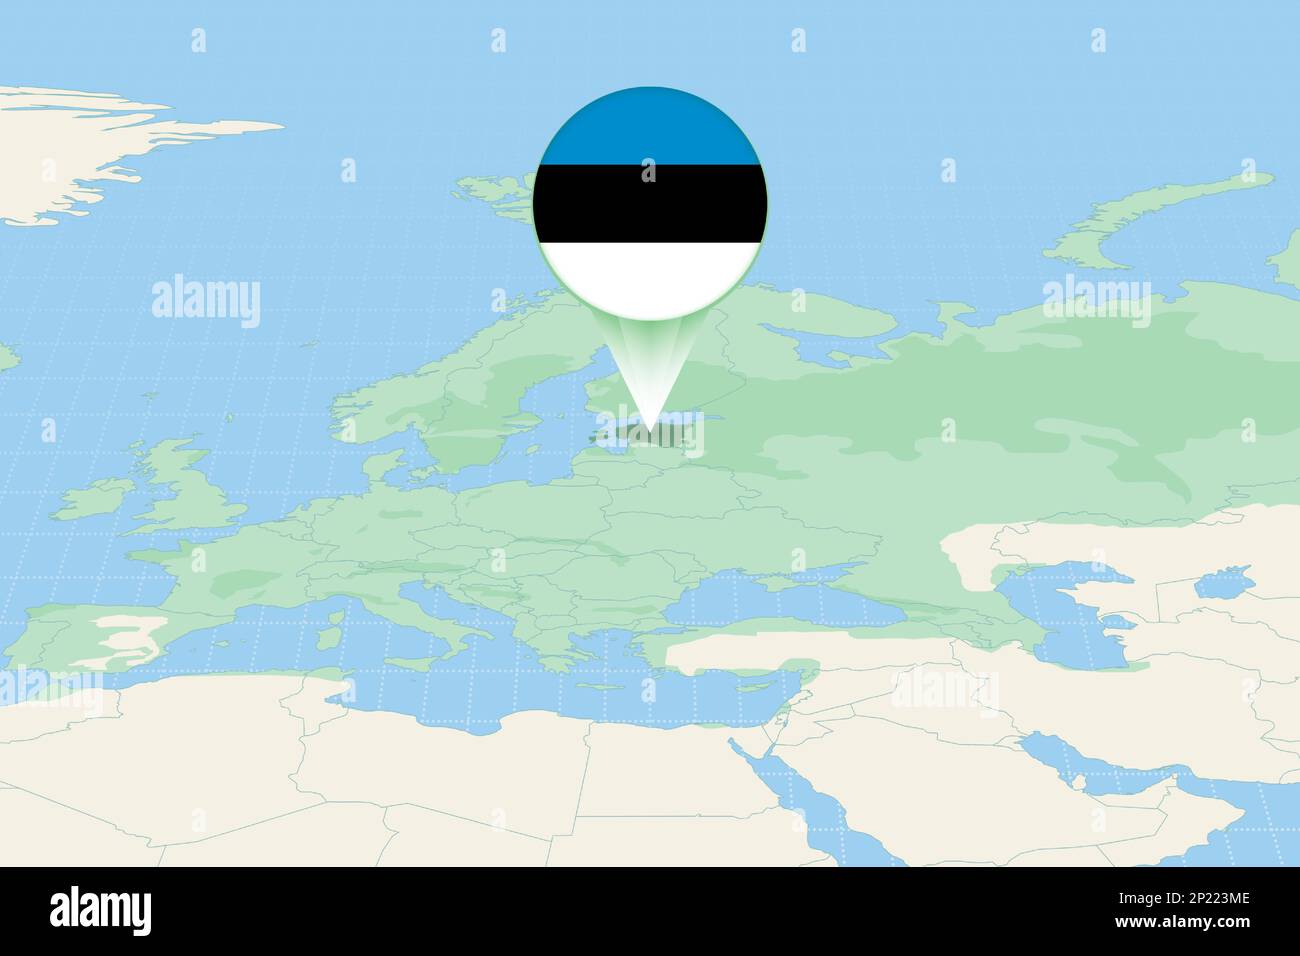 Map illustration of Estonia with the flag. Cartographic illustration of Estonia and neighboring countries. Vector map and flag. Stock Vector